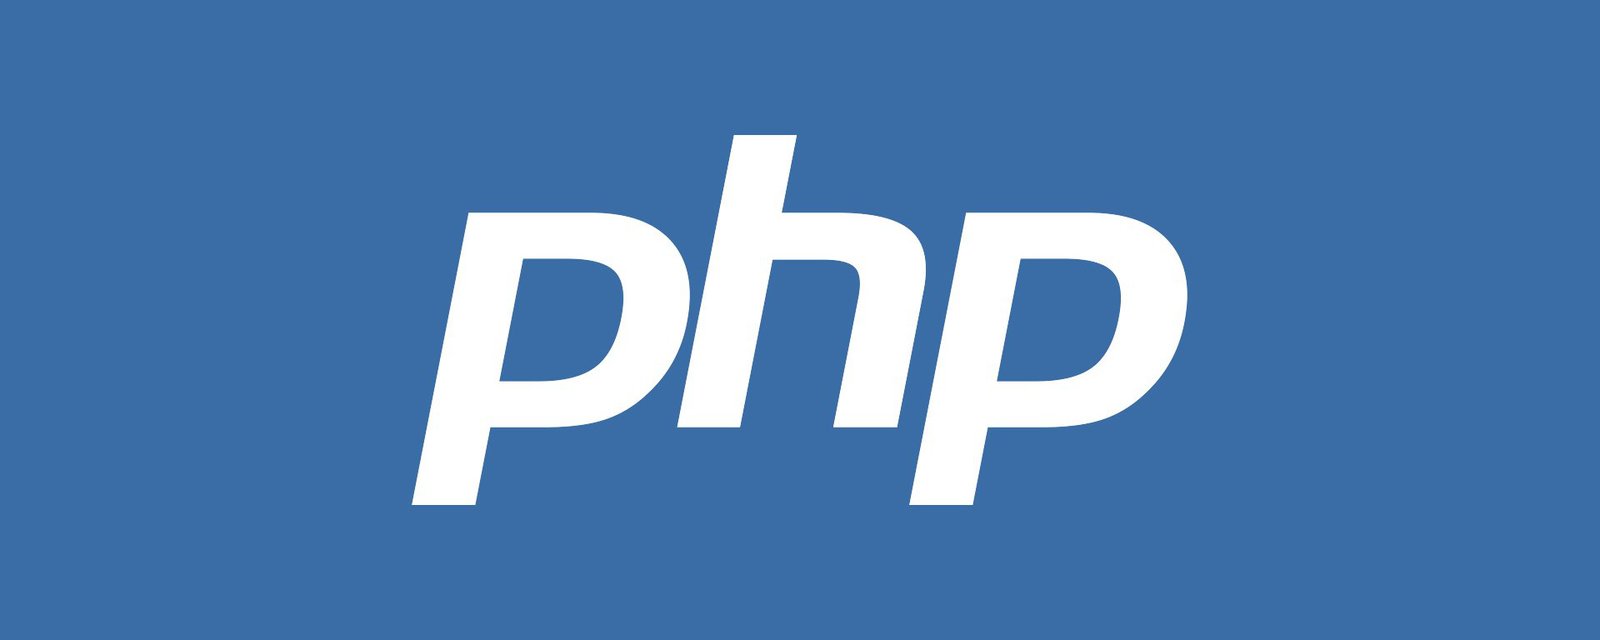 Securing PHP Page Access